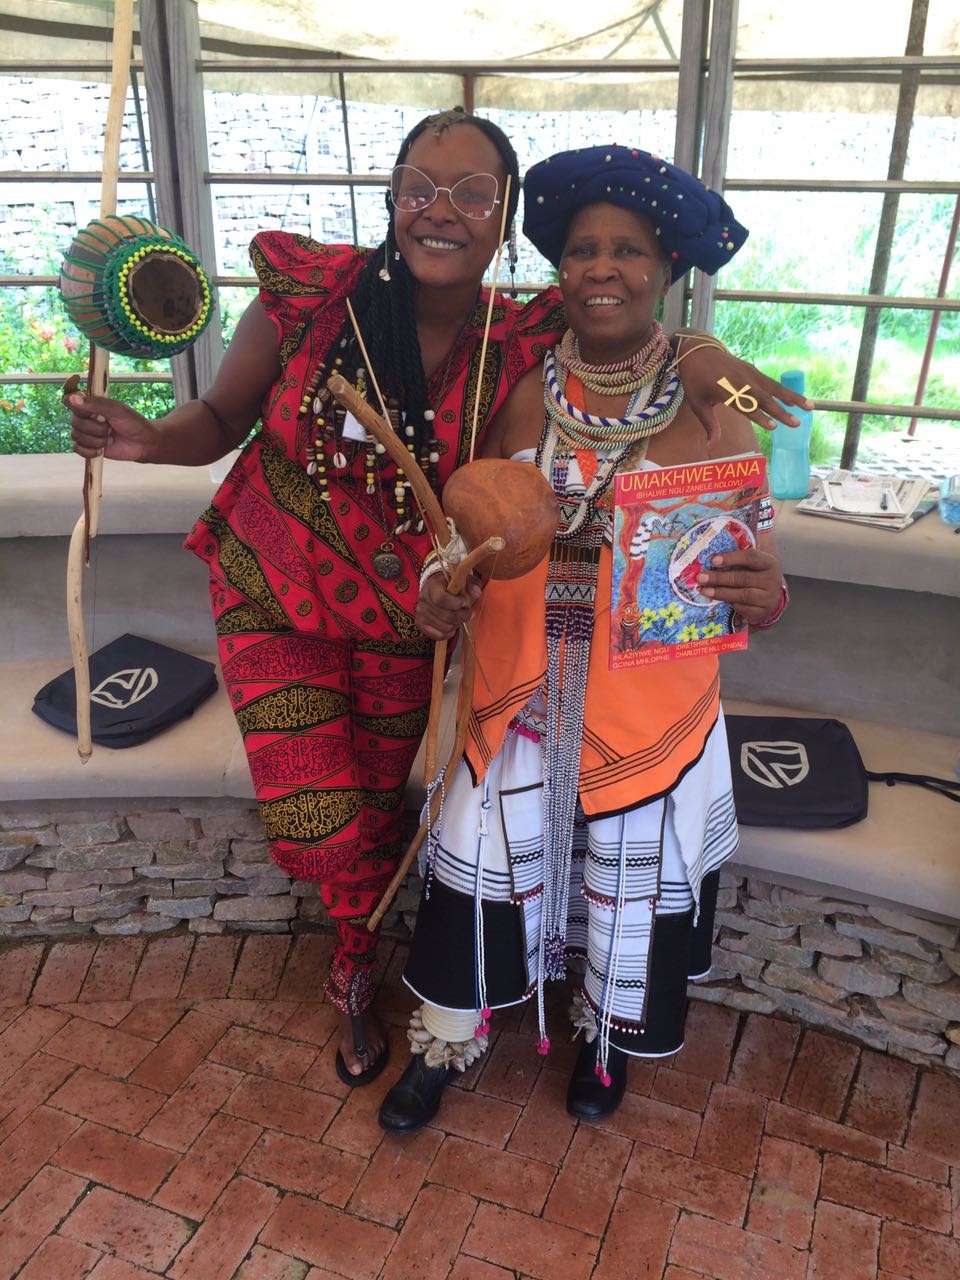 Zanele Ndlovu with the legendary Latozi ‘Madosini’ Mphahleni at the Puku Story Festival in Grahamstown last week. Both artists play indigenous African musical instruments and are avid storytellers. Picture: Supplied